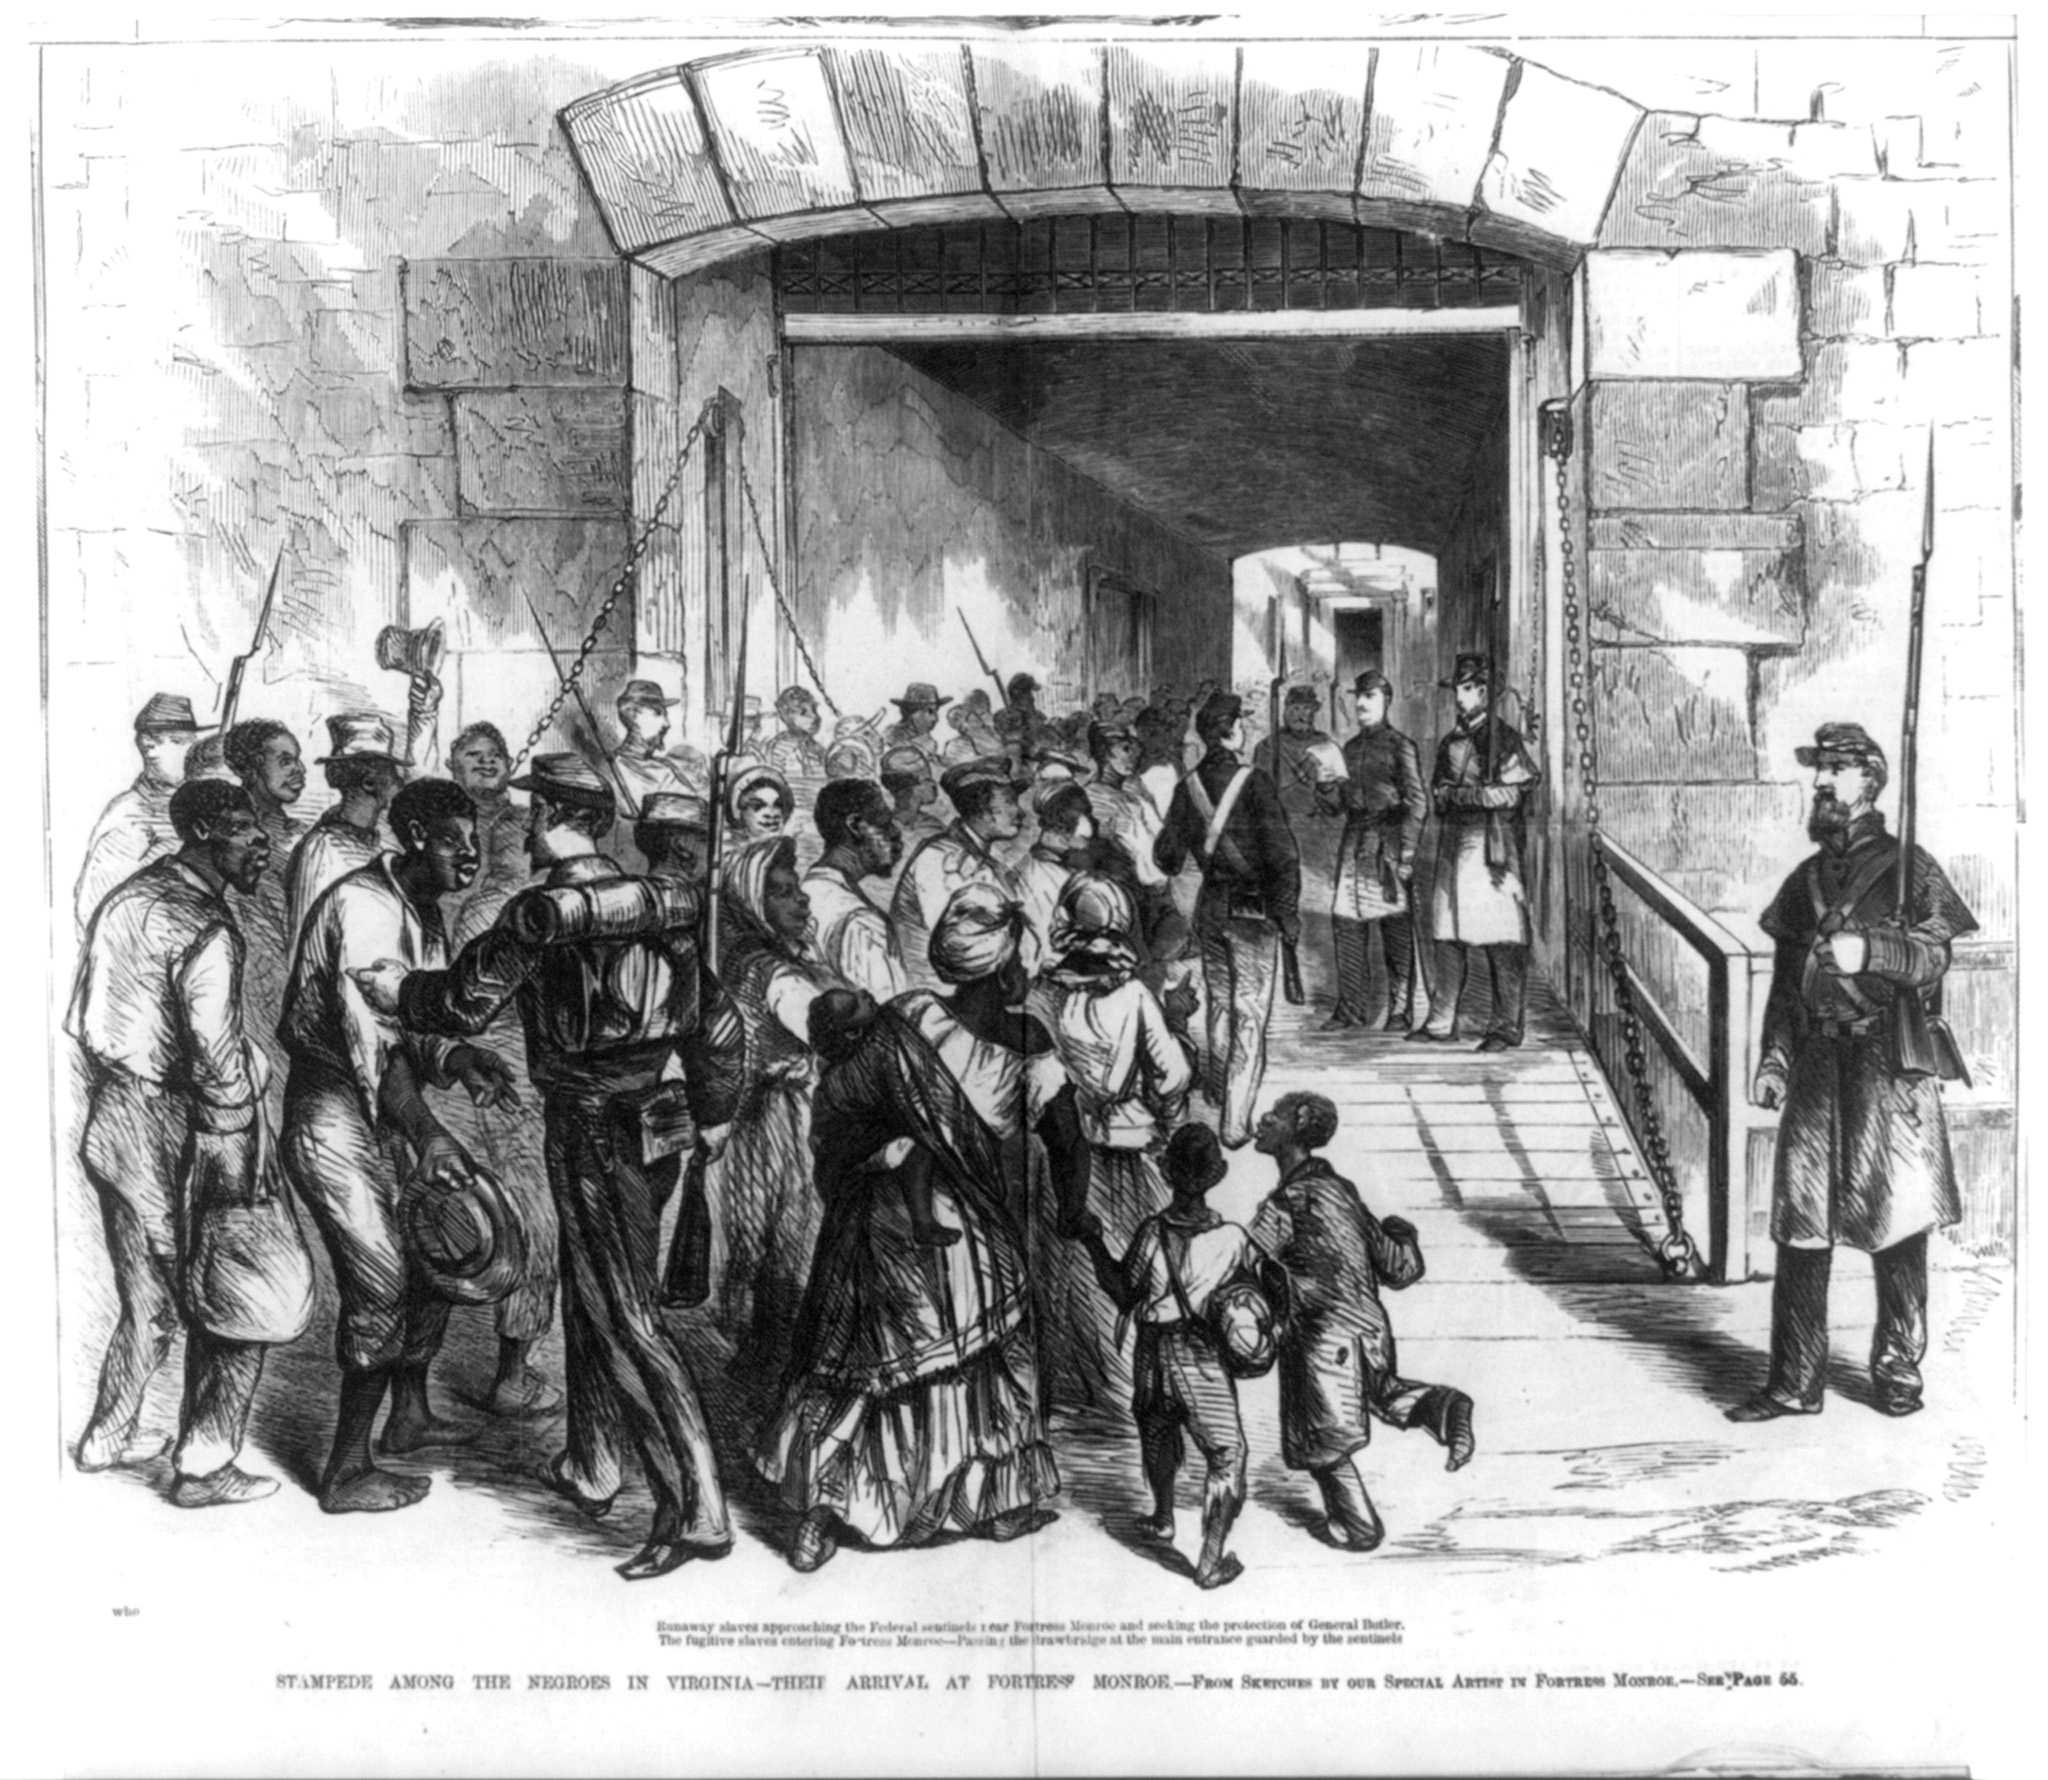 Illustration of soldiers and people at Fort Monroe